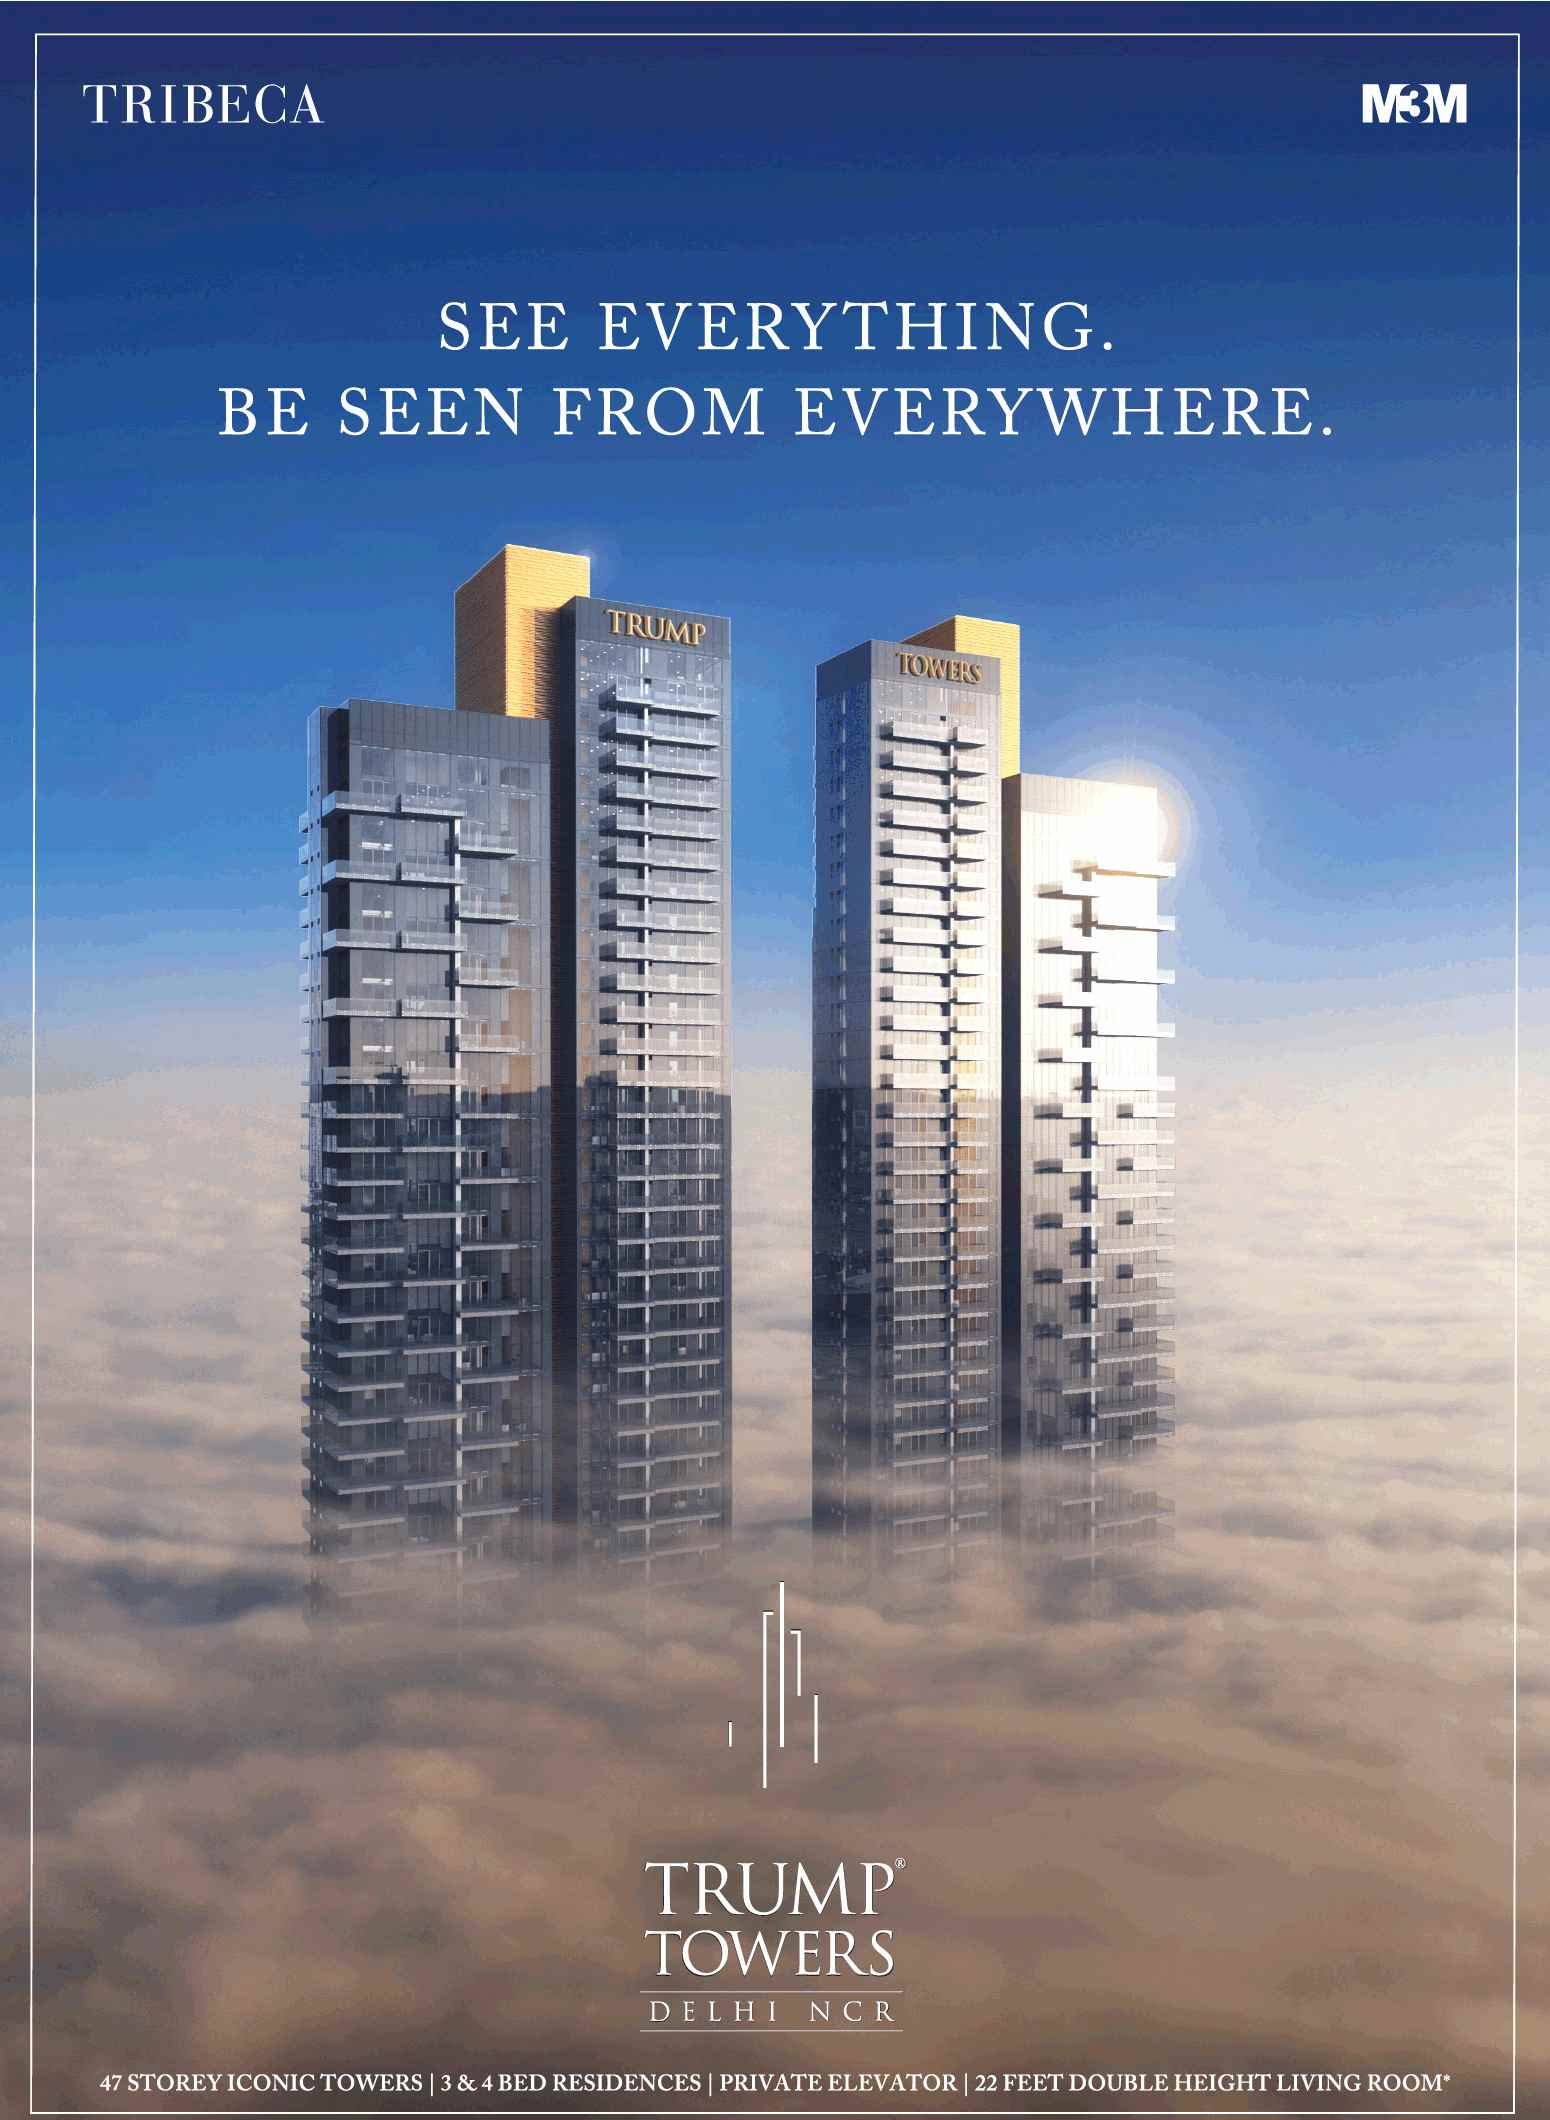 See everything & be seen from everywhere at Trump Towers in Gurgaon